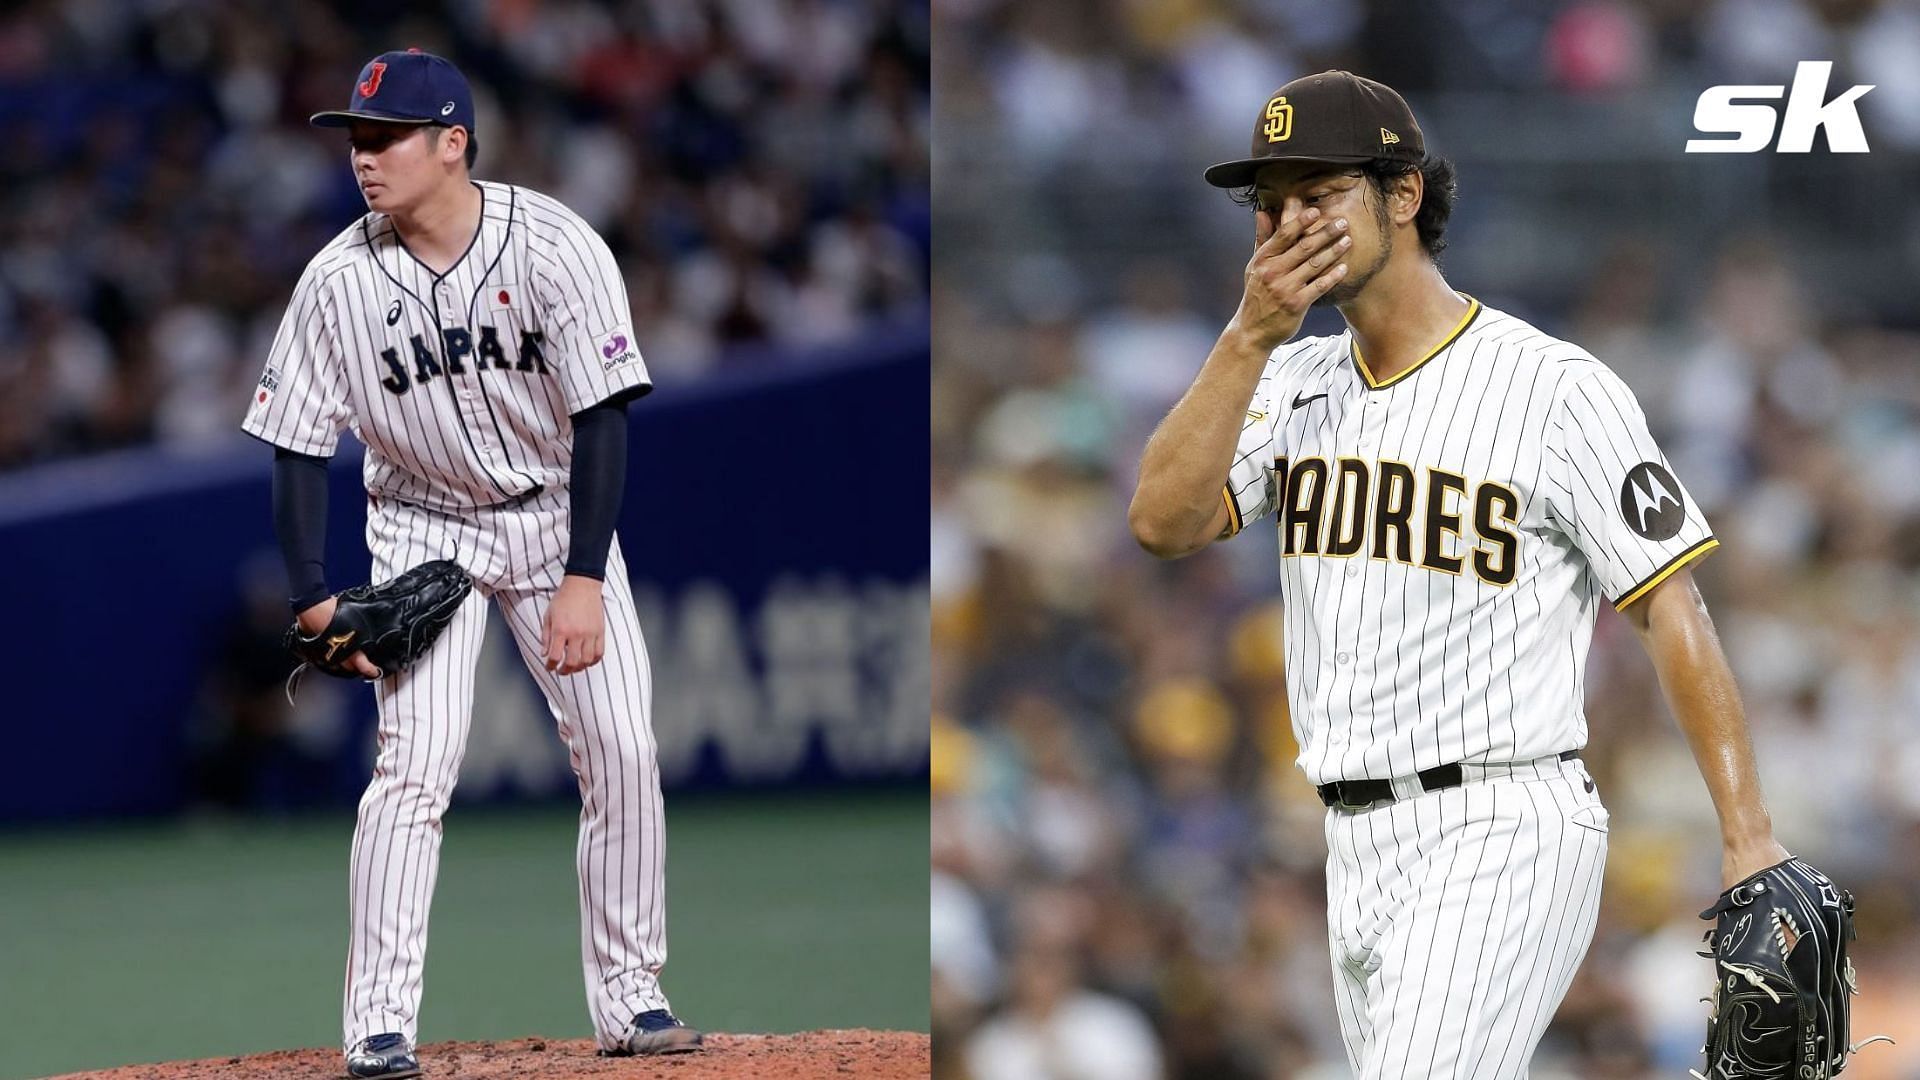 Yu Darvish pumped to have Yuki Matsui join him on the San Diego Padres